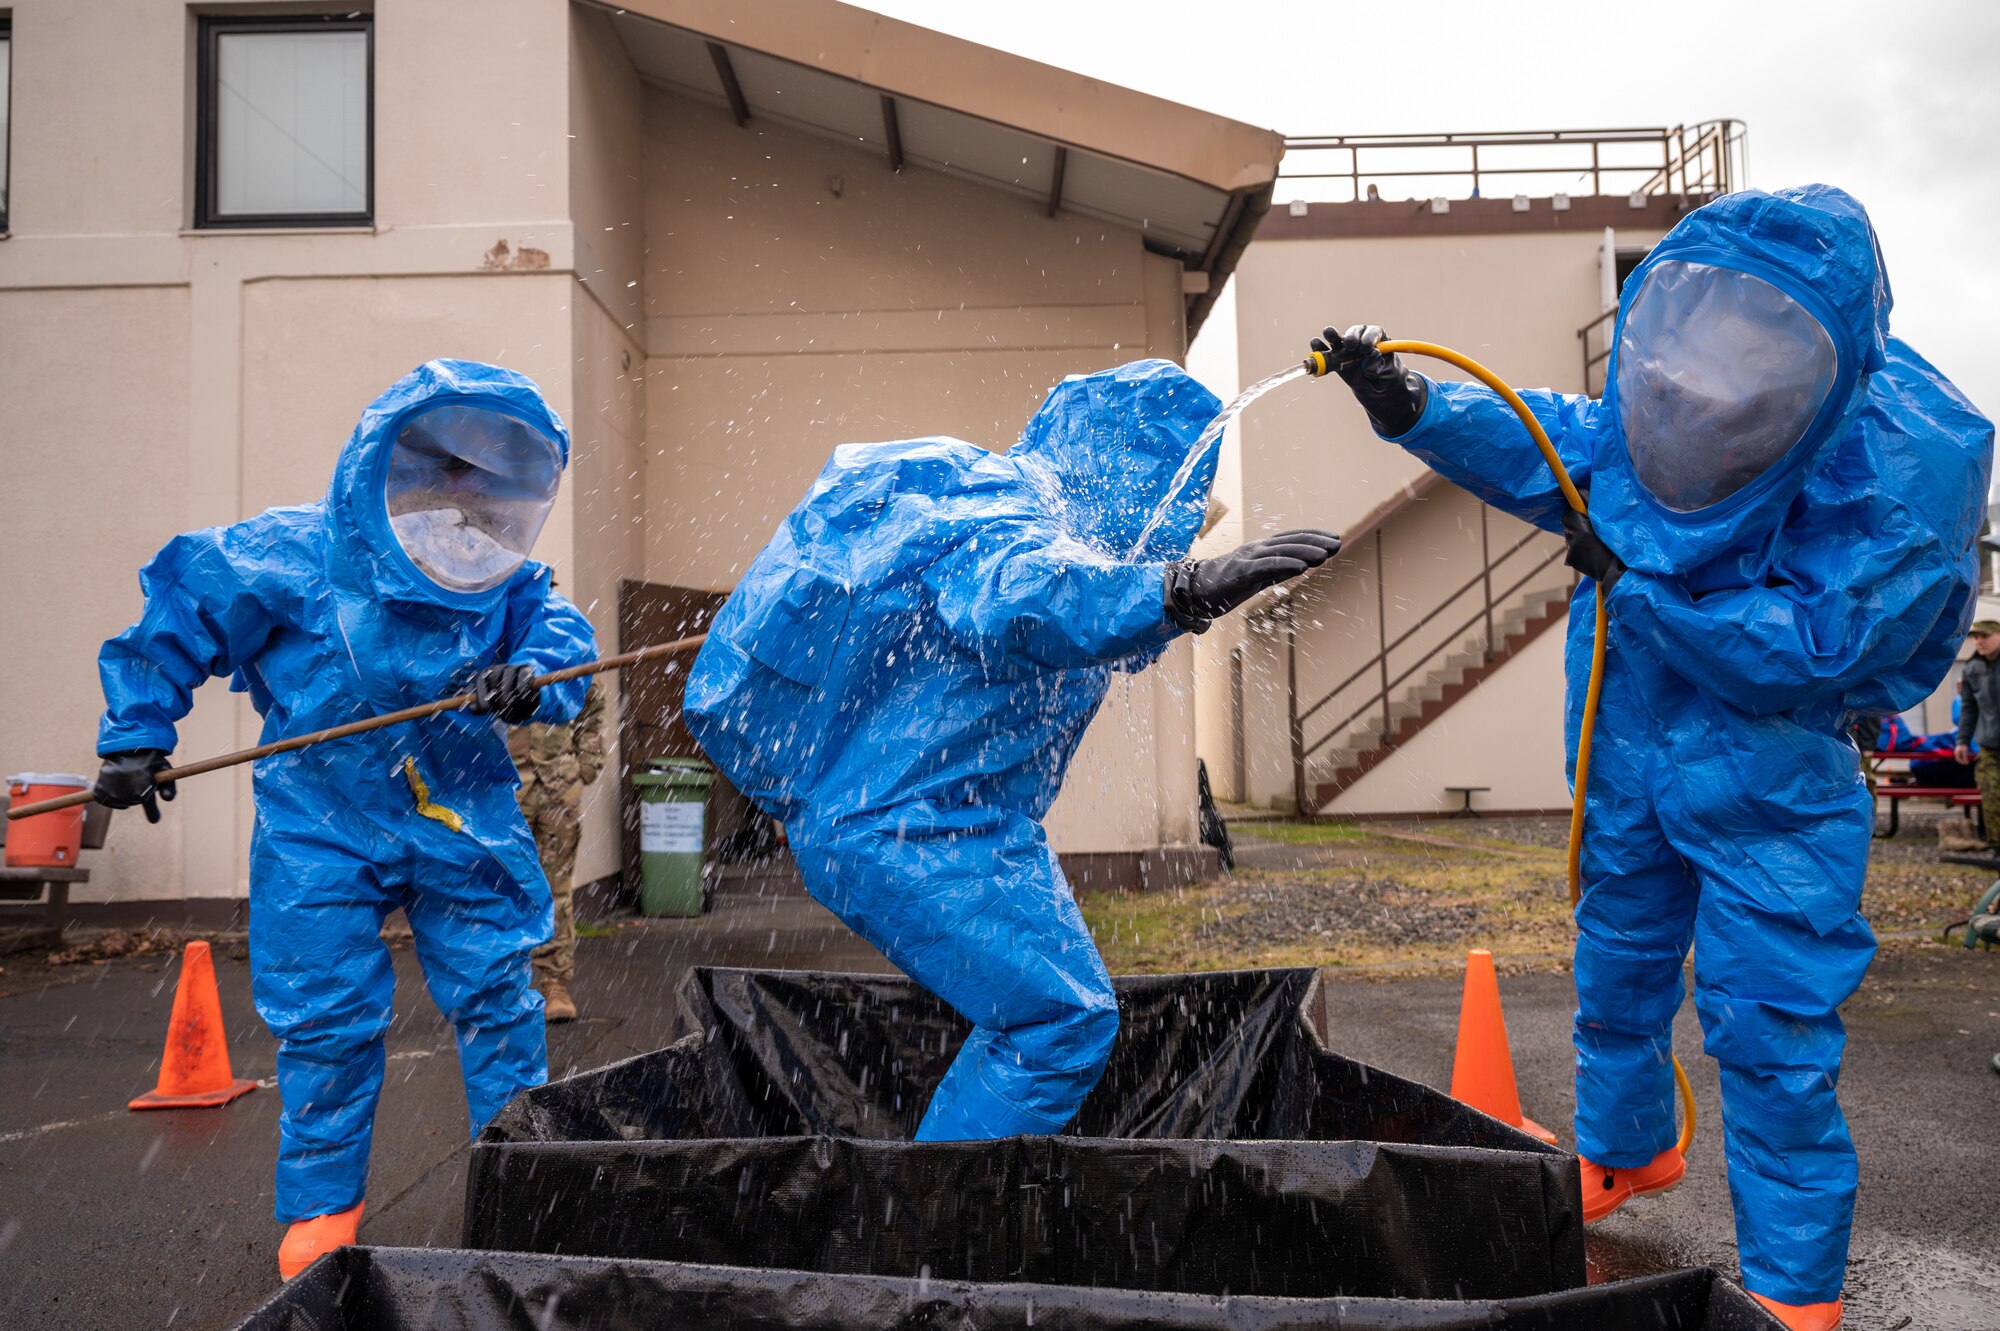 A person in a HAZMAT suit being sprayed with water and scrubbed with a brush by two other people in HAZMAT suits.